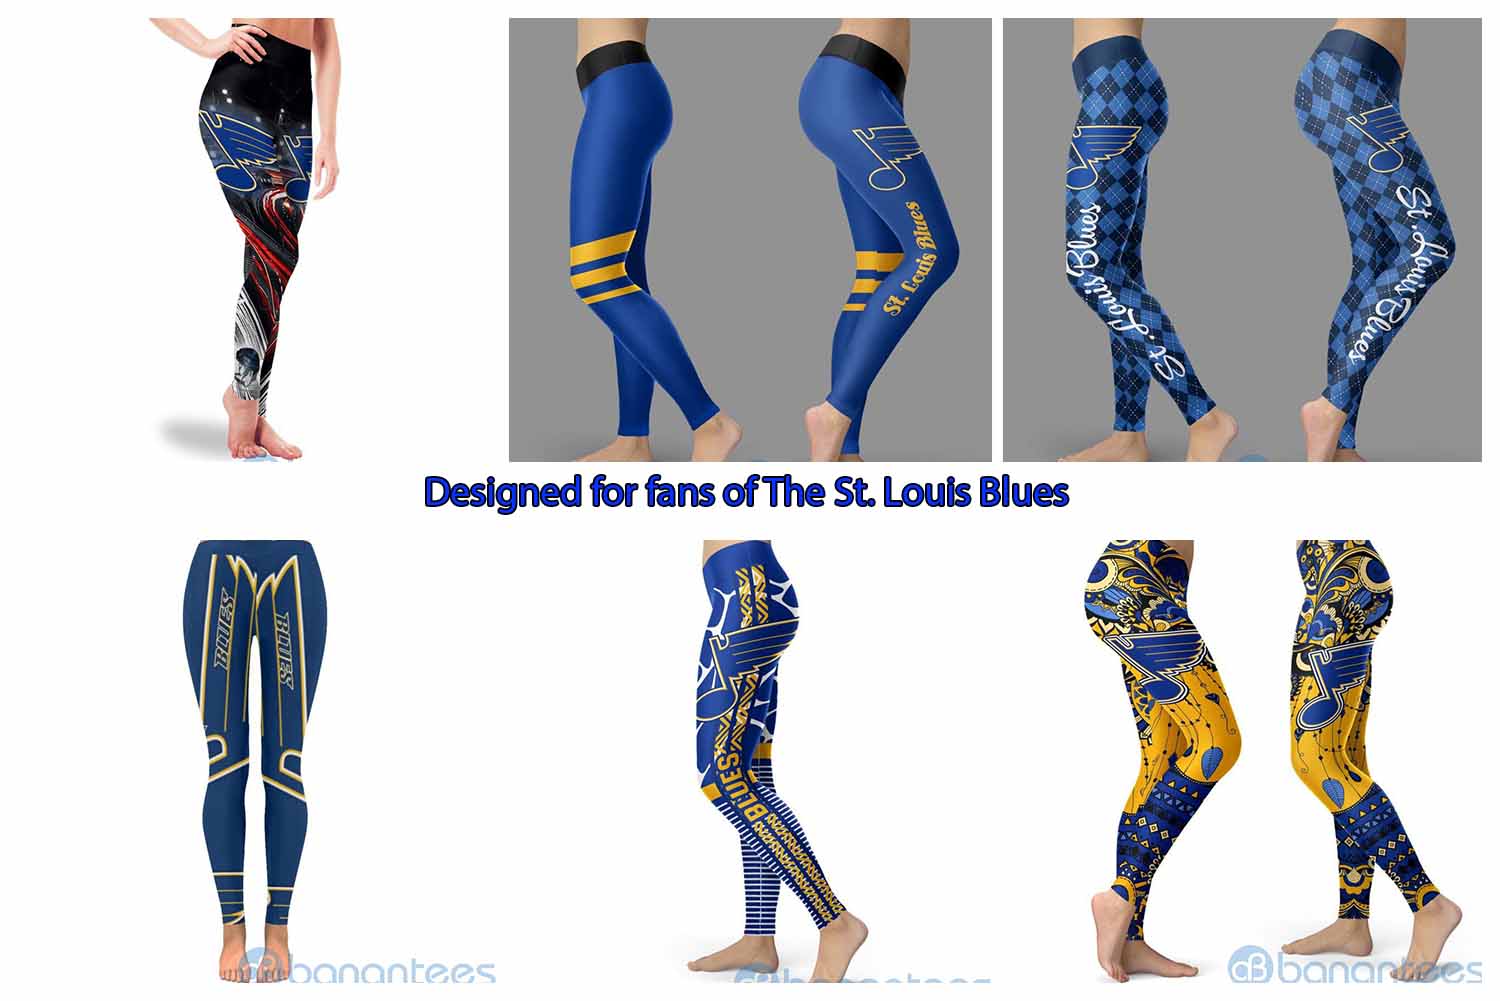 Designed for fans of The St. Louis Blues